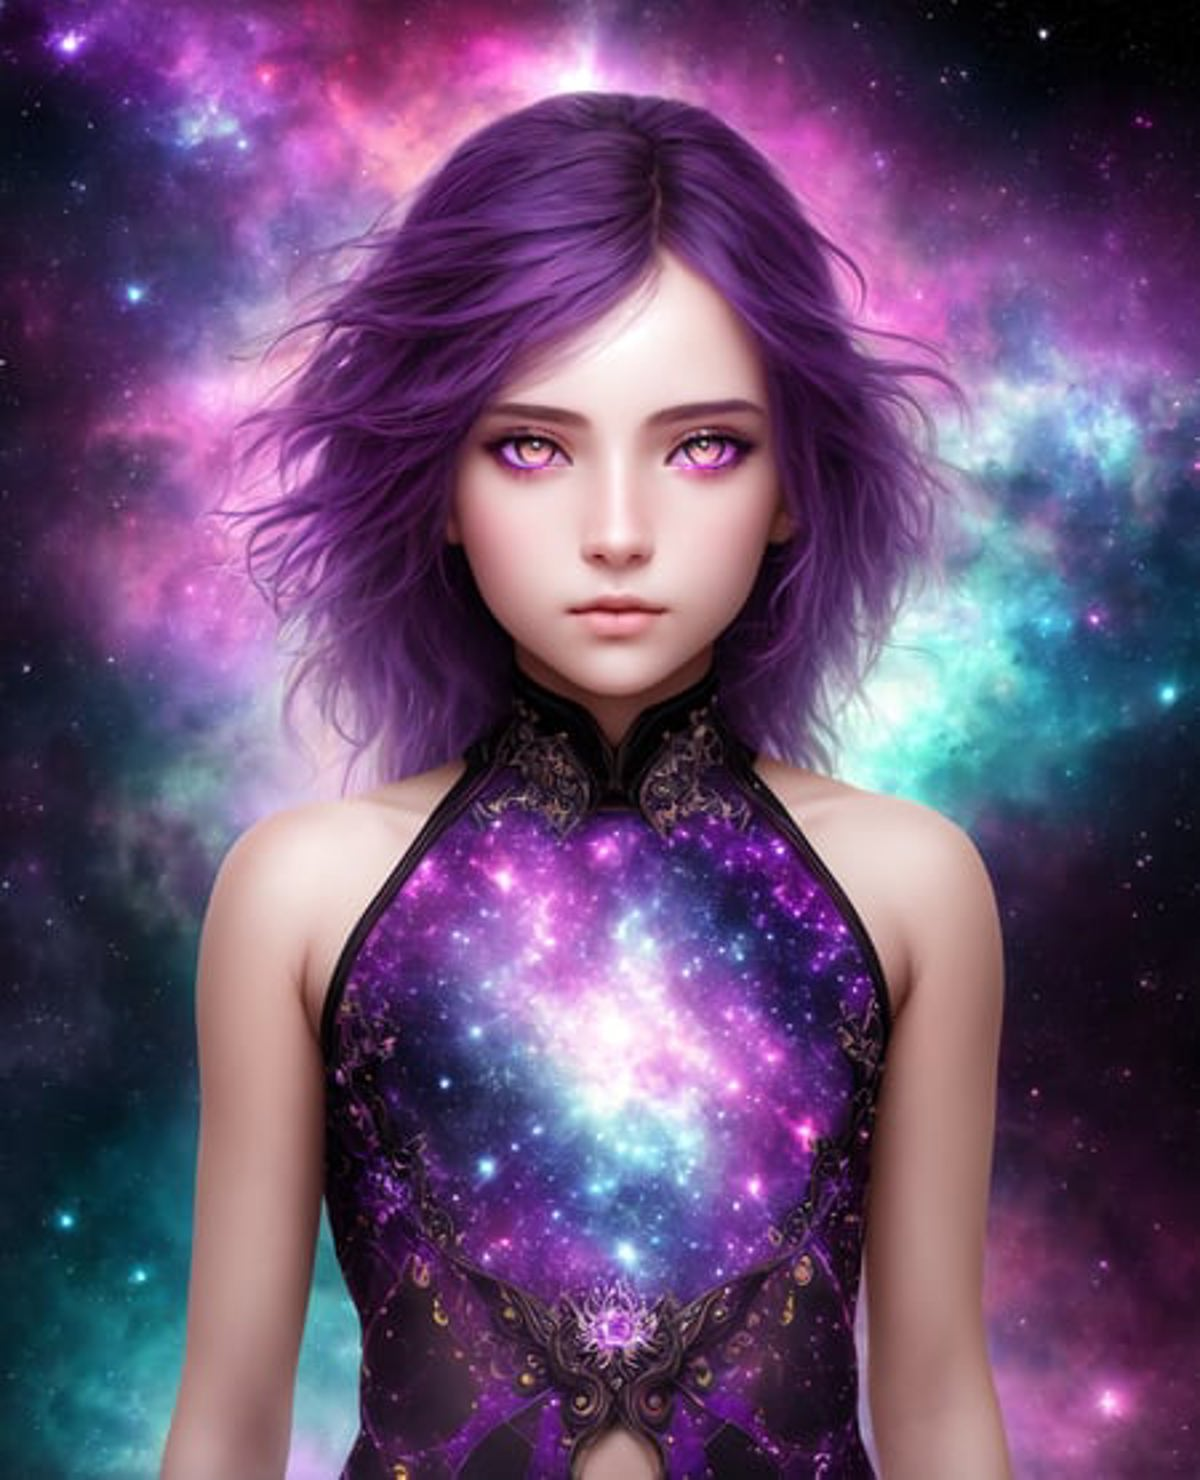 Portrait of a girl, fractal art body, purple eyes and hair, intricate details, colorful nebula in background, professional...